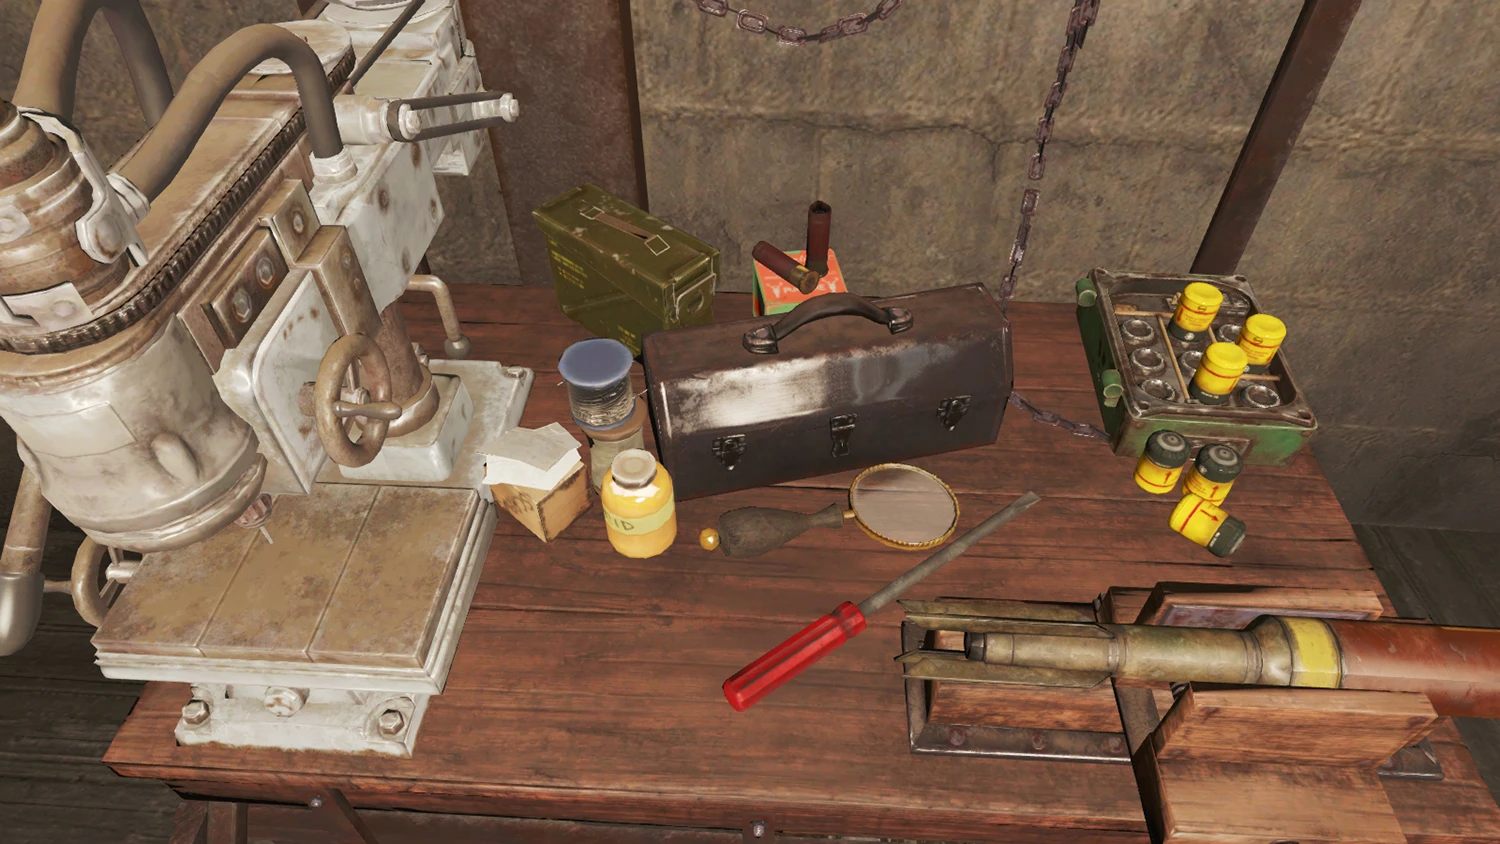 where to find lots of ammo in fallout 4